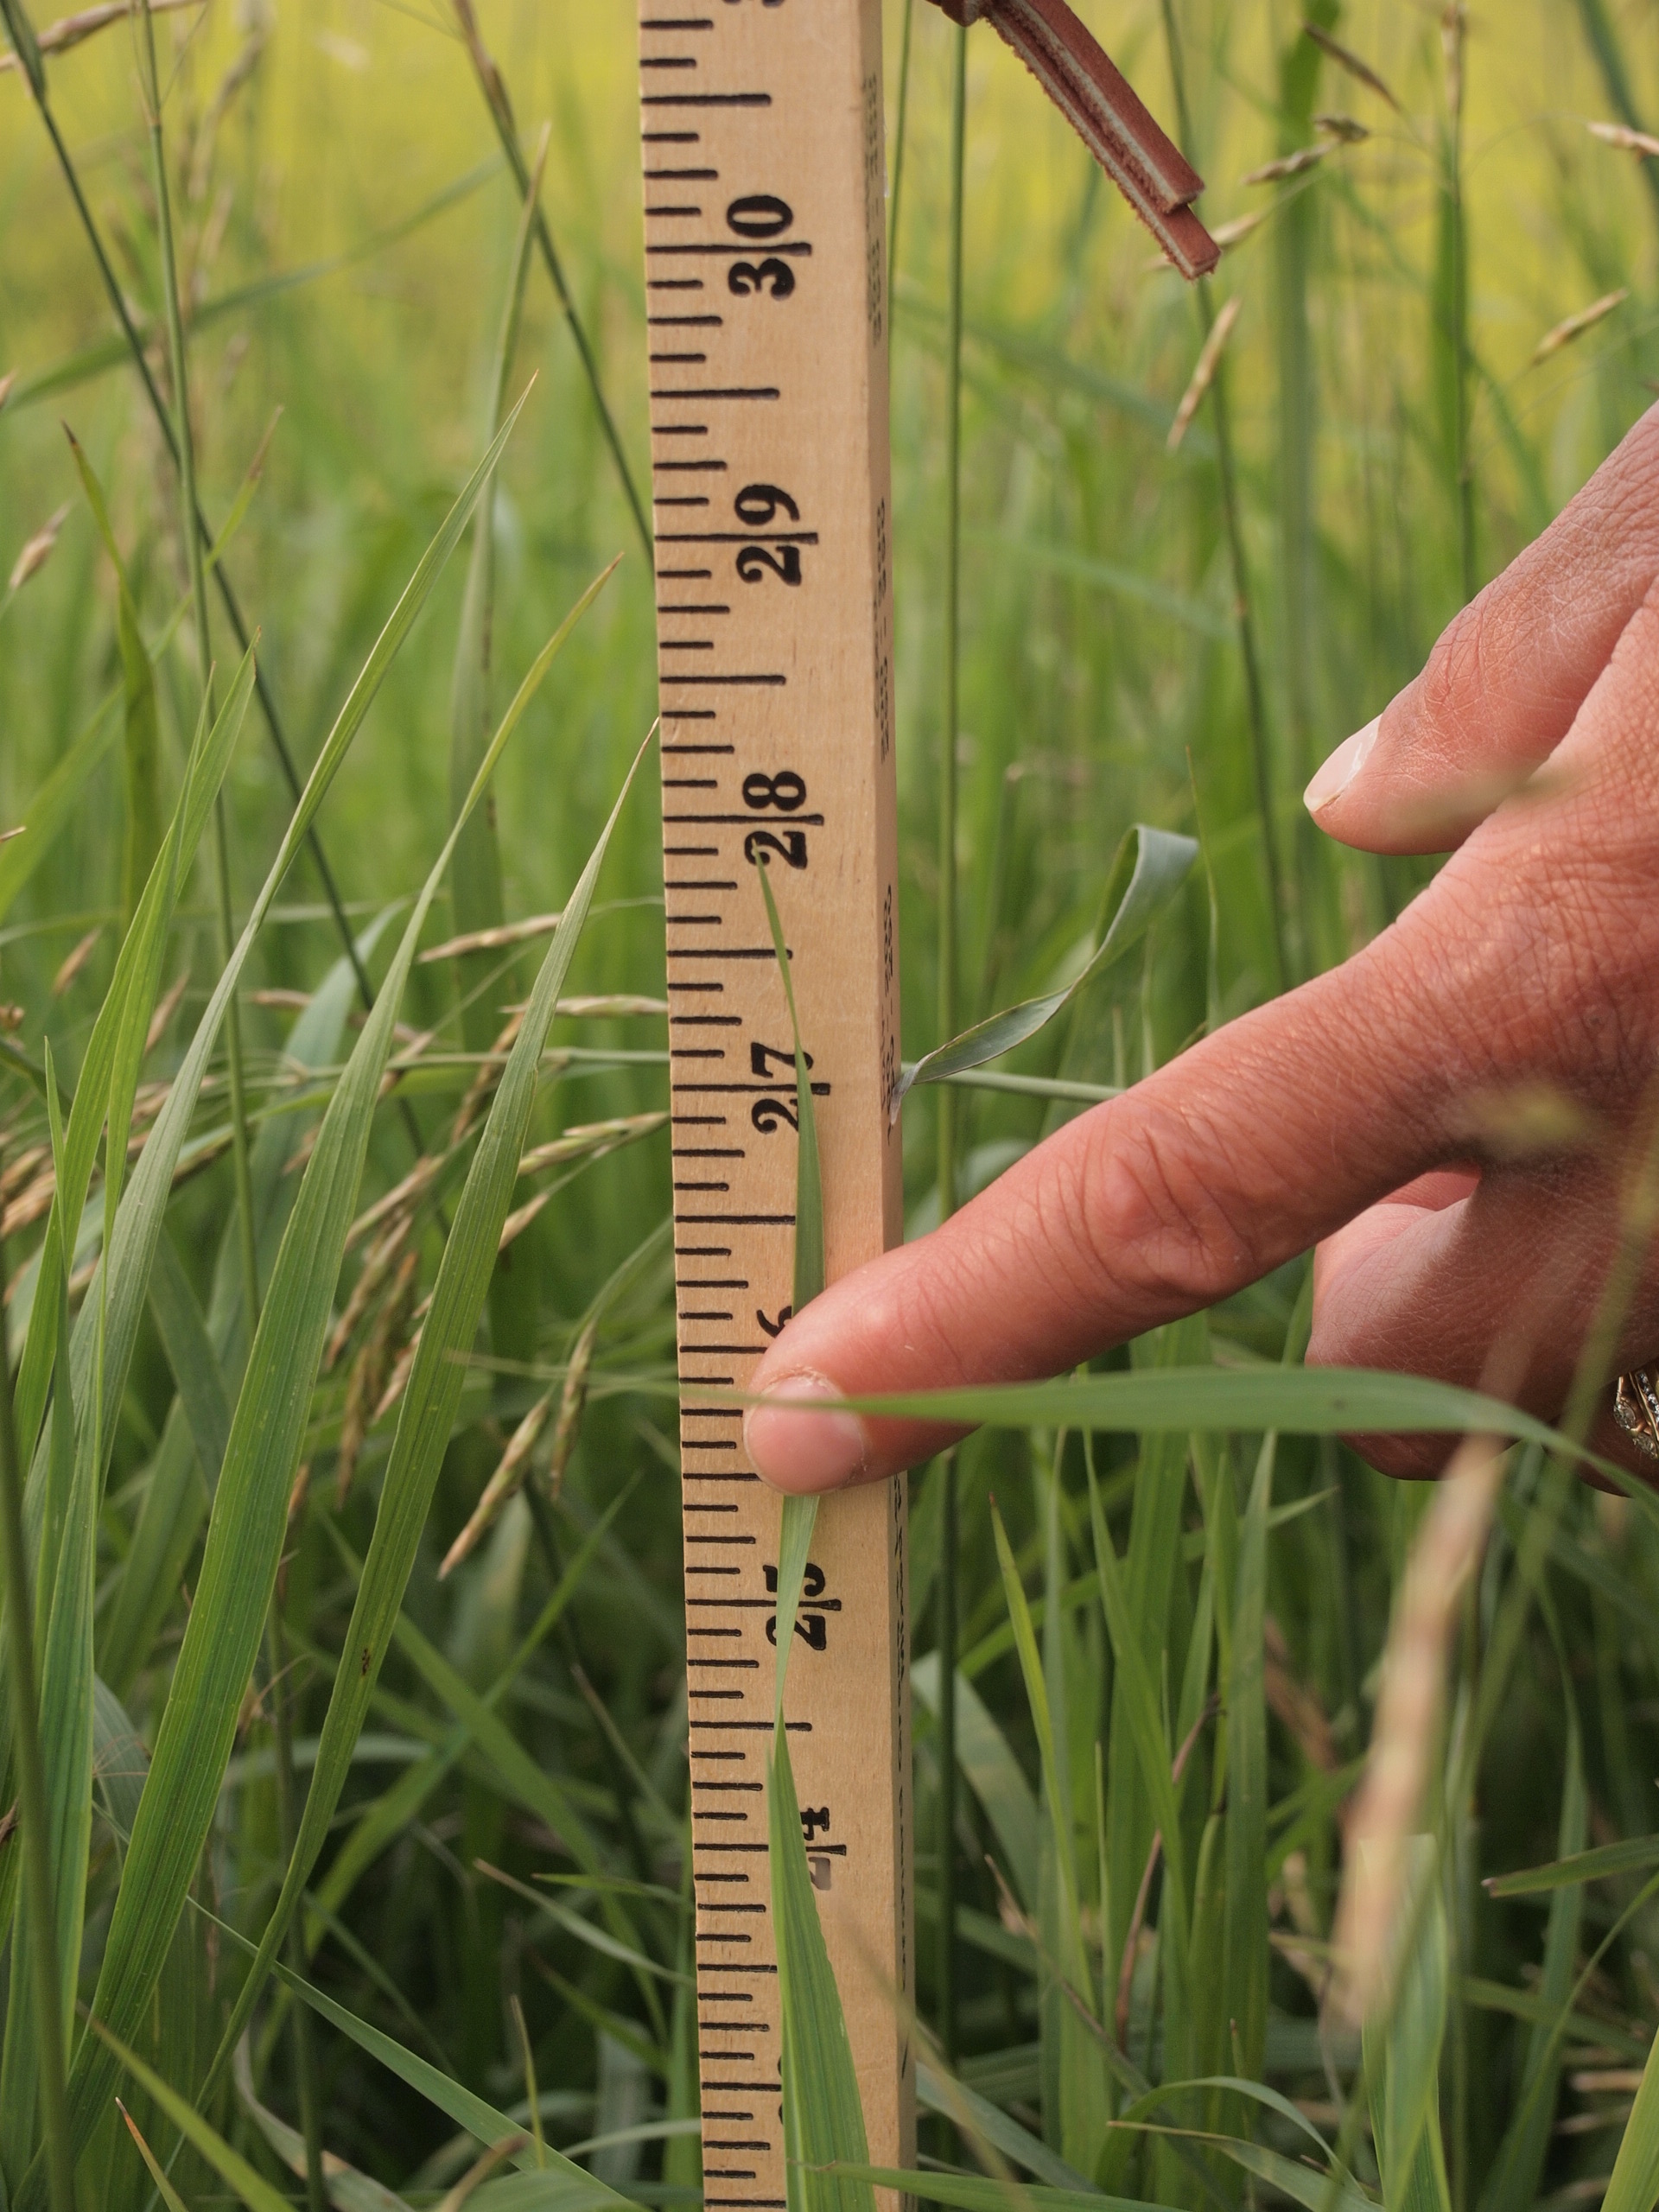 This grazing monitoring stick, developed by the NDSU Extension Service, can help producers monitor their pastures and rangelands. (NDSU photo)